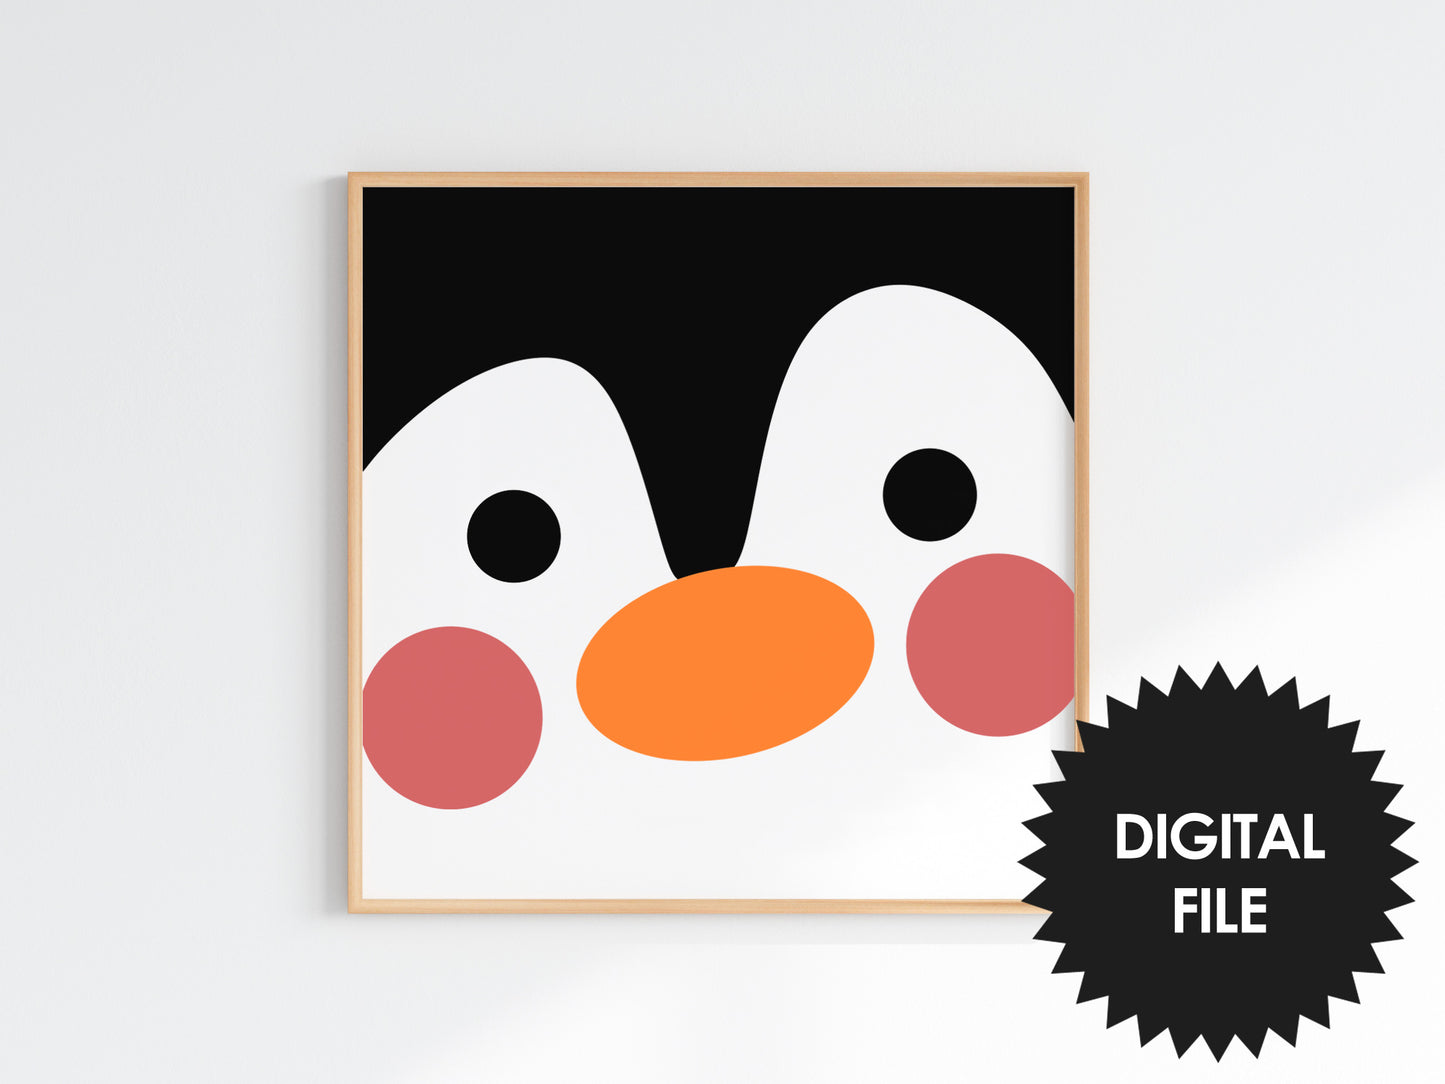 Christmas Wall Art Printables For Kids Set of 3, Santa, Snowman and Penguin Print, Digital Download, Print Any Size Up To 20x20 inch